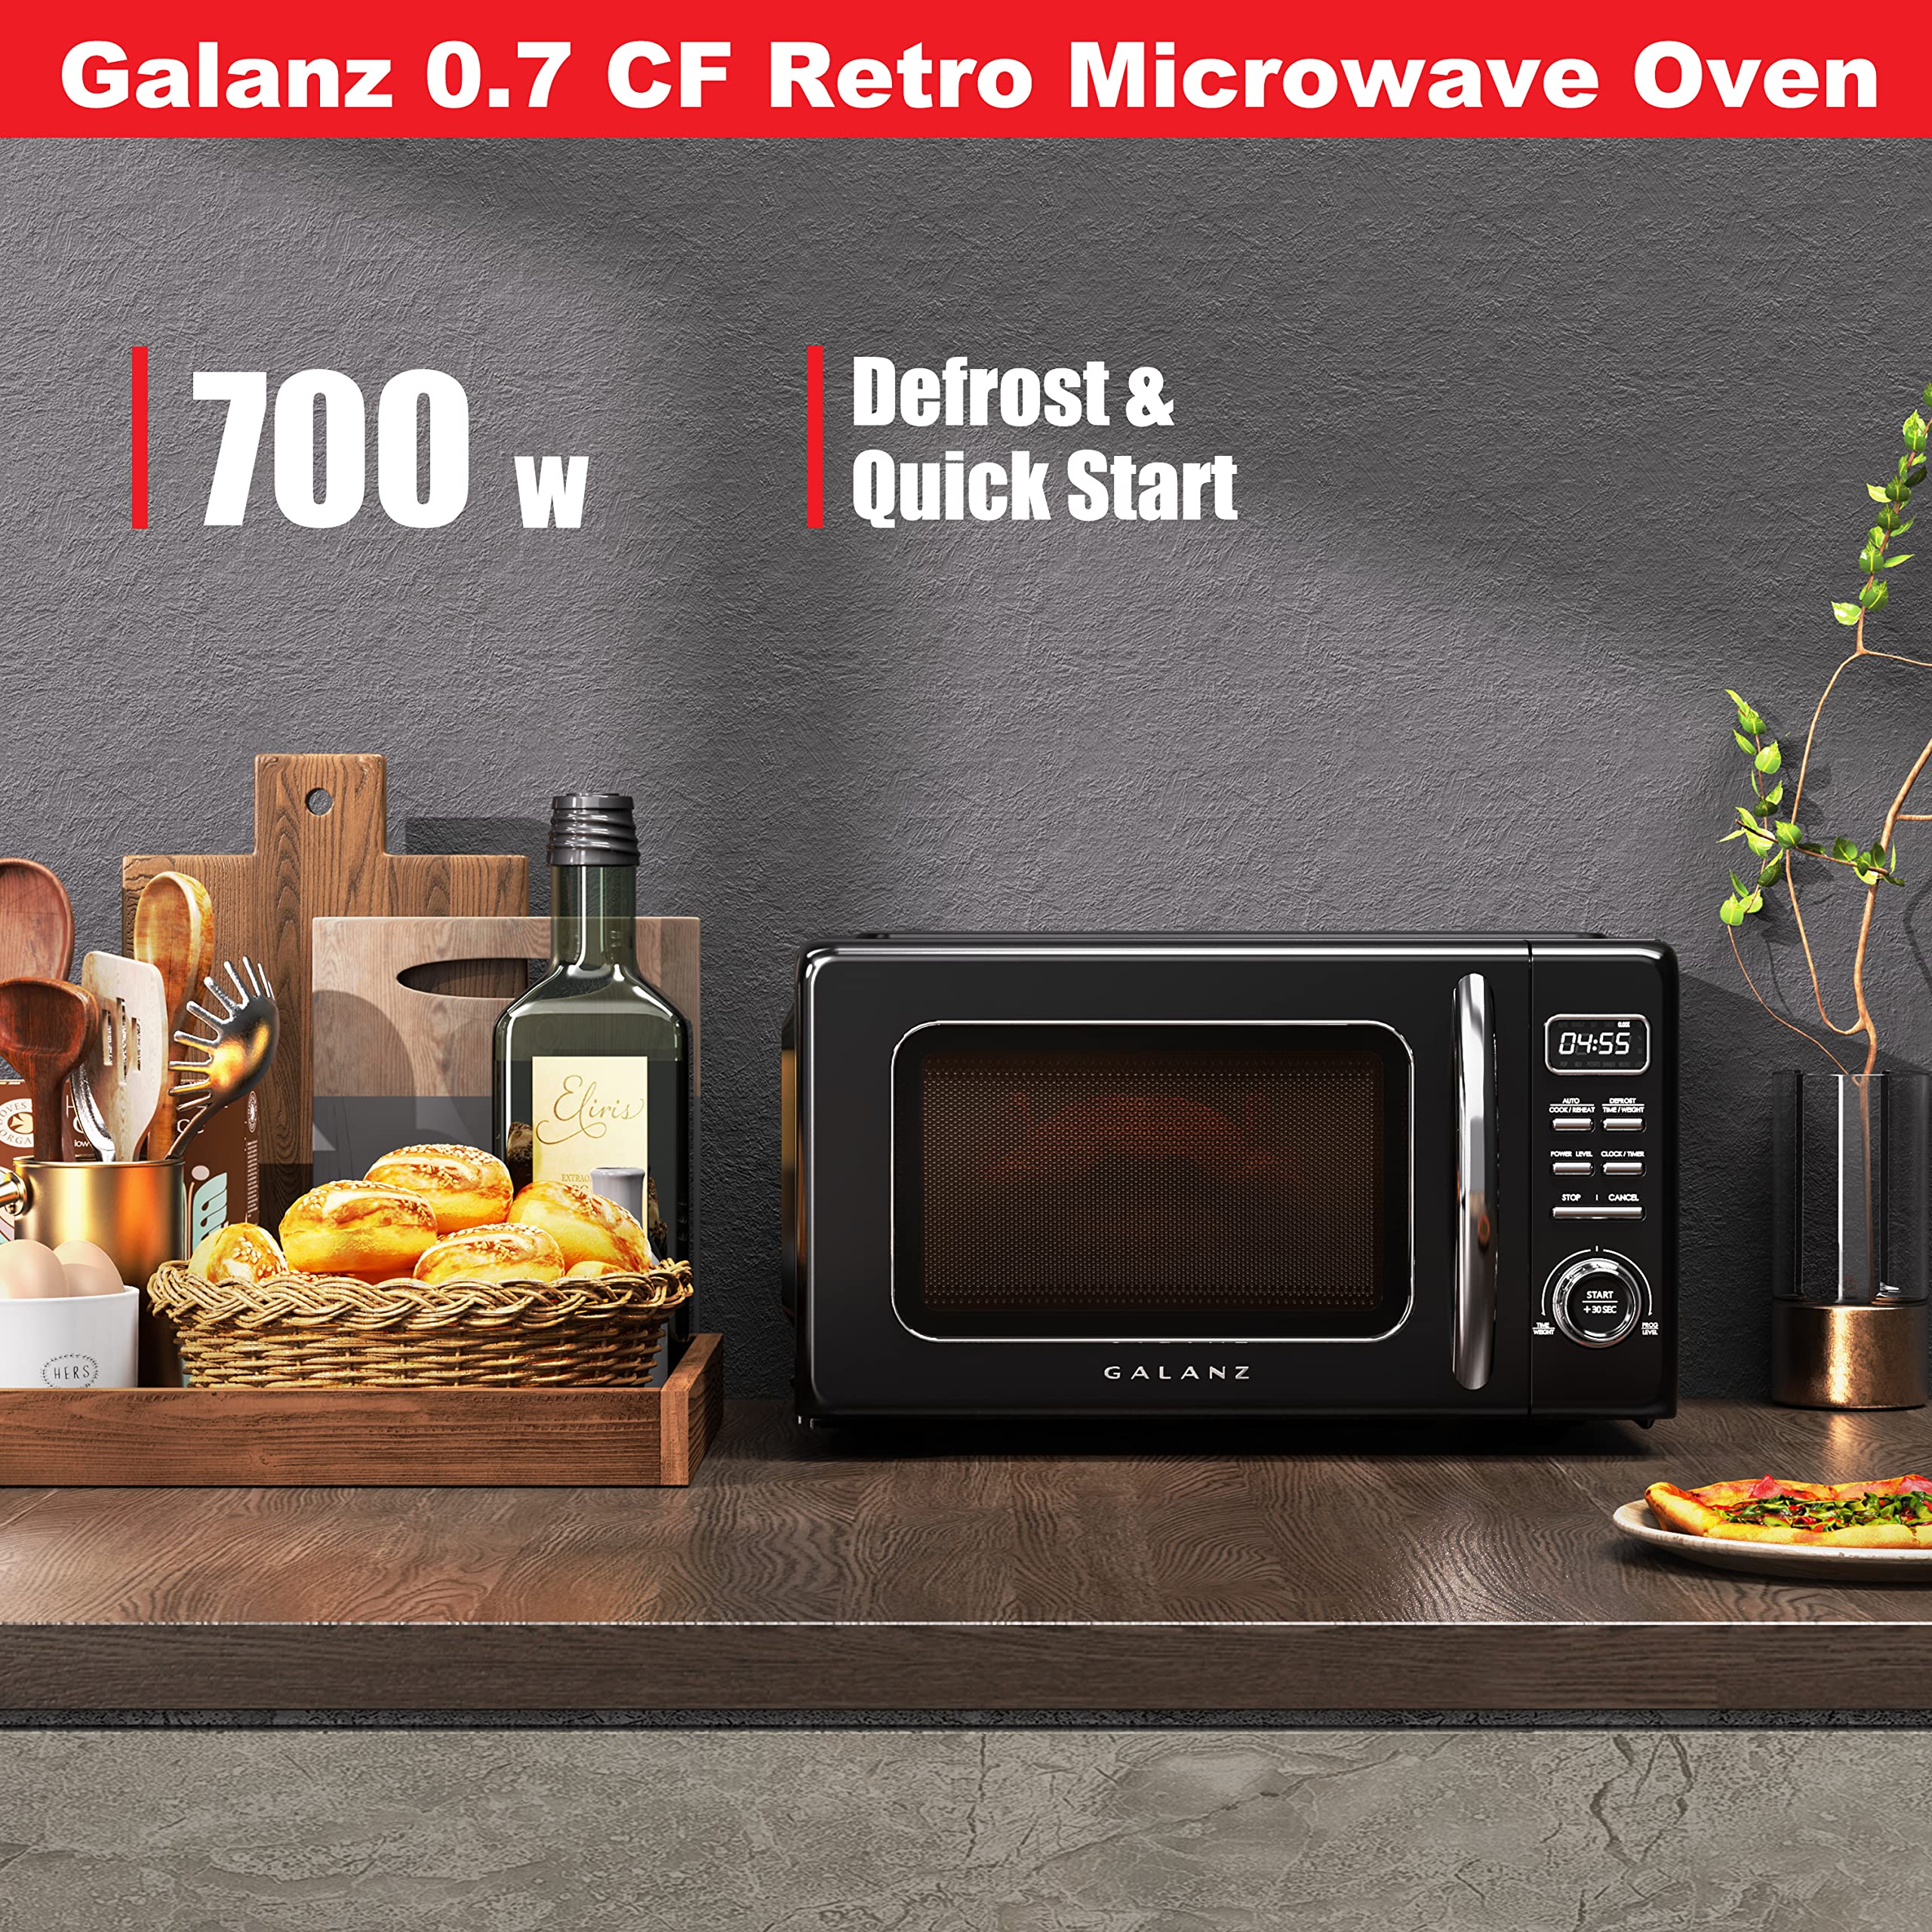 Galanz GLCMKZ07BKR07 Retro Countertop Microwave Oven with Auto Cook & Reheat, Defrost, Quick Start Functions, Easy Clean with Glass Turntable, Pull Handle.7 cu ft, Black